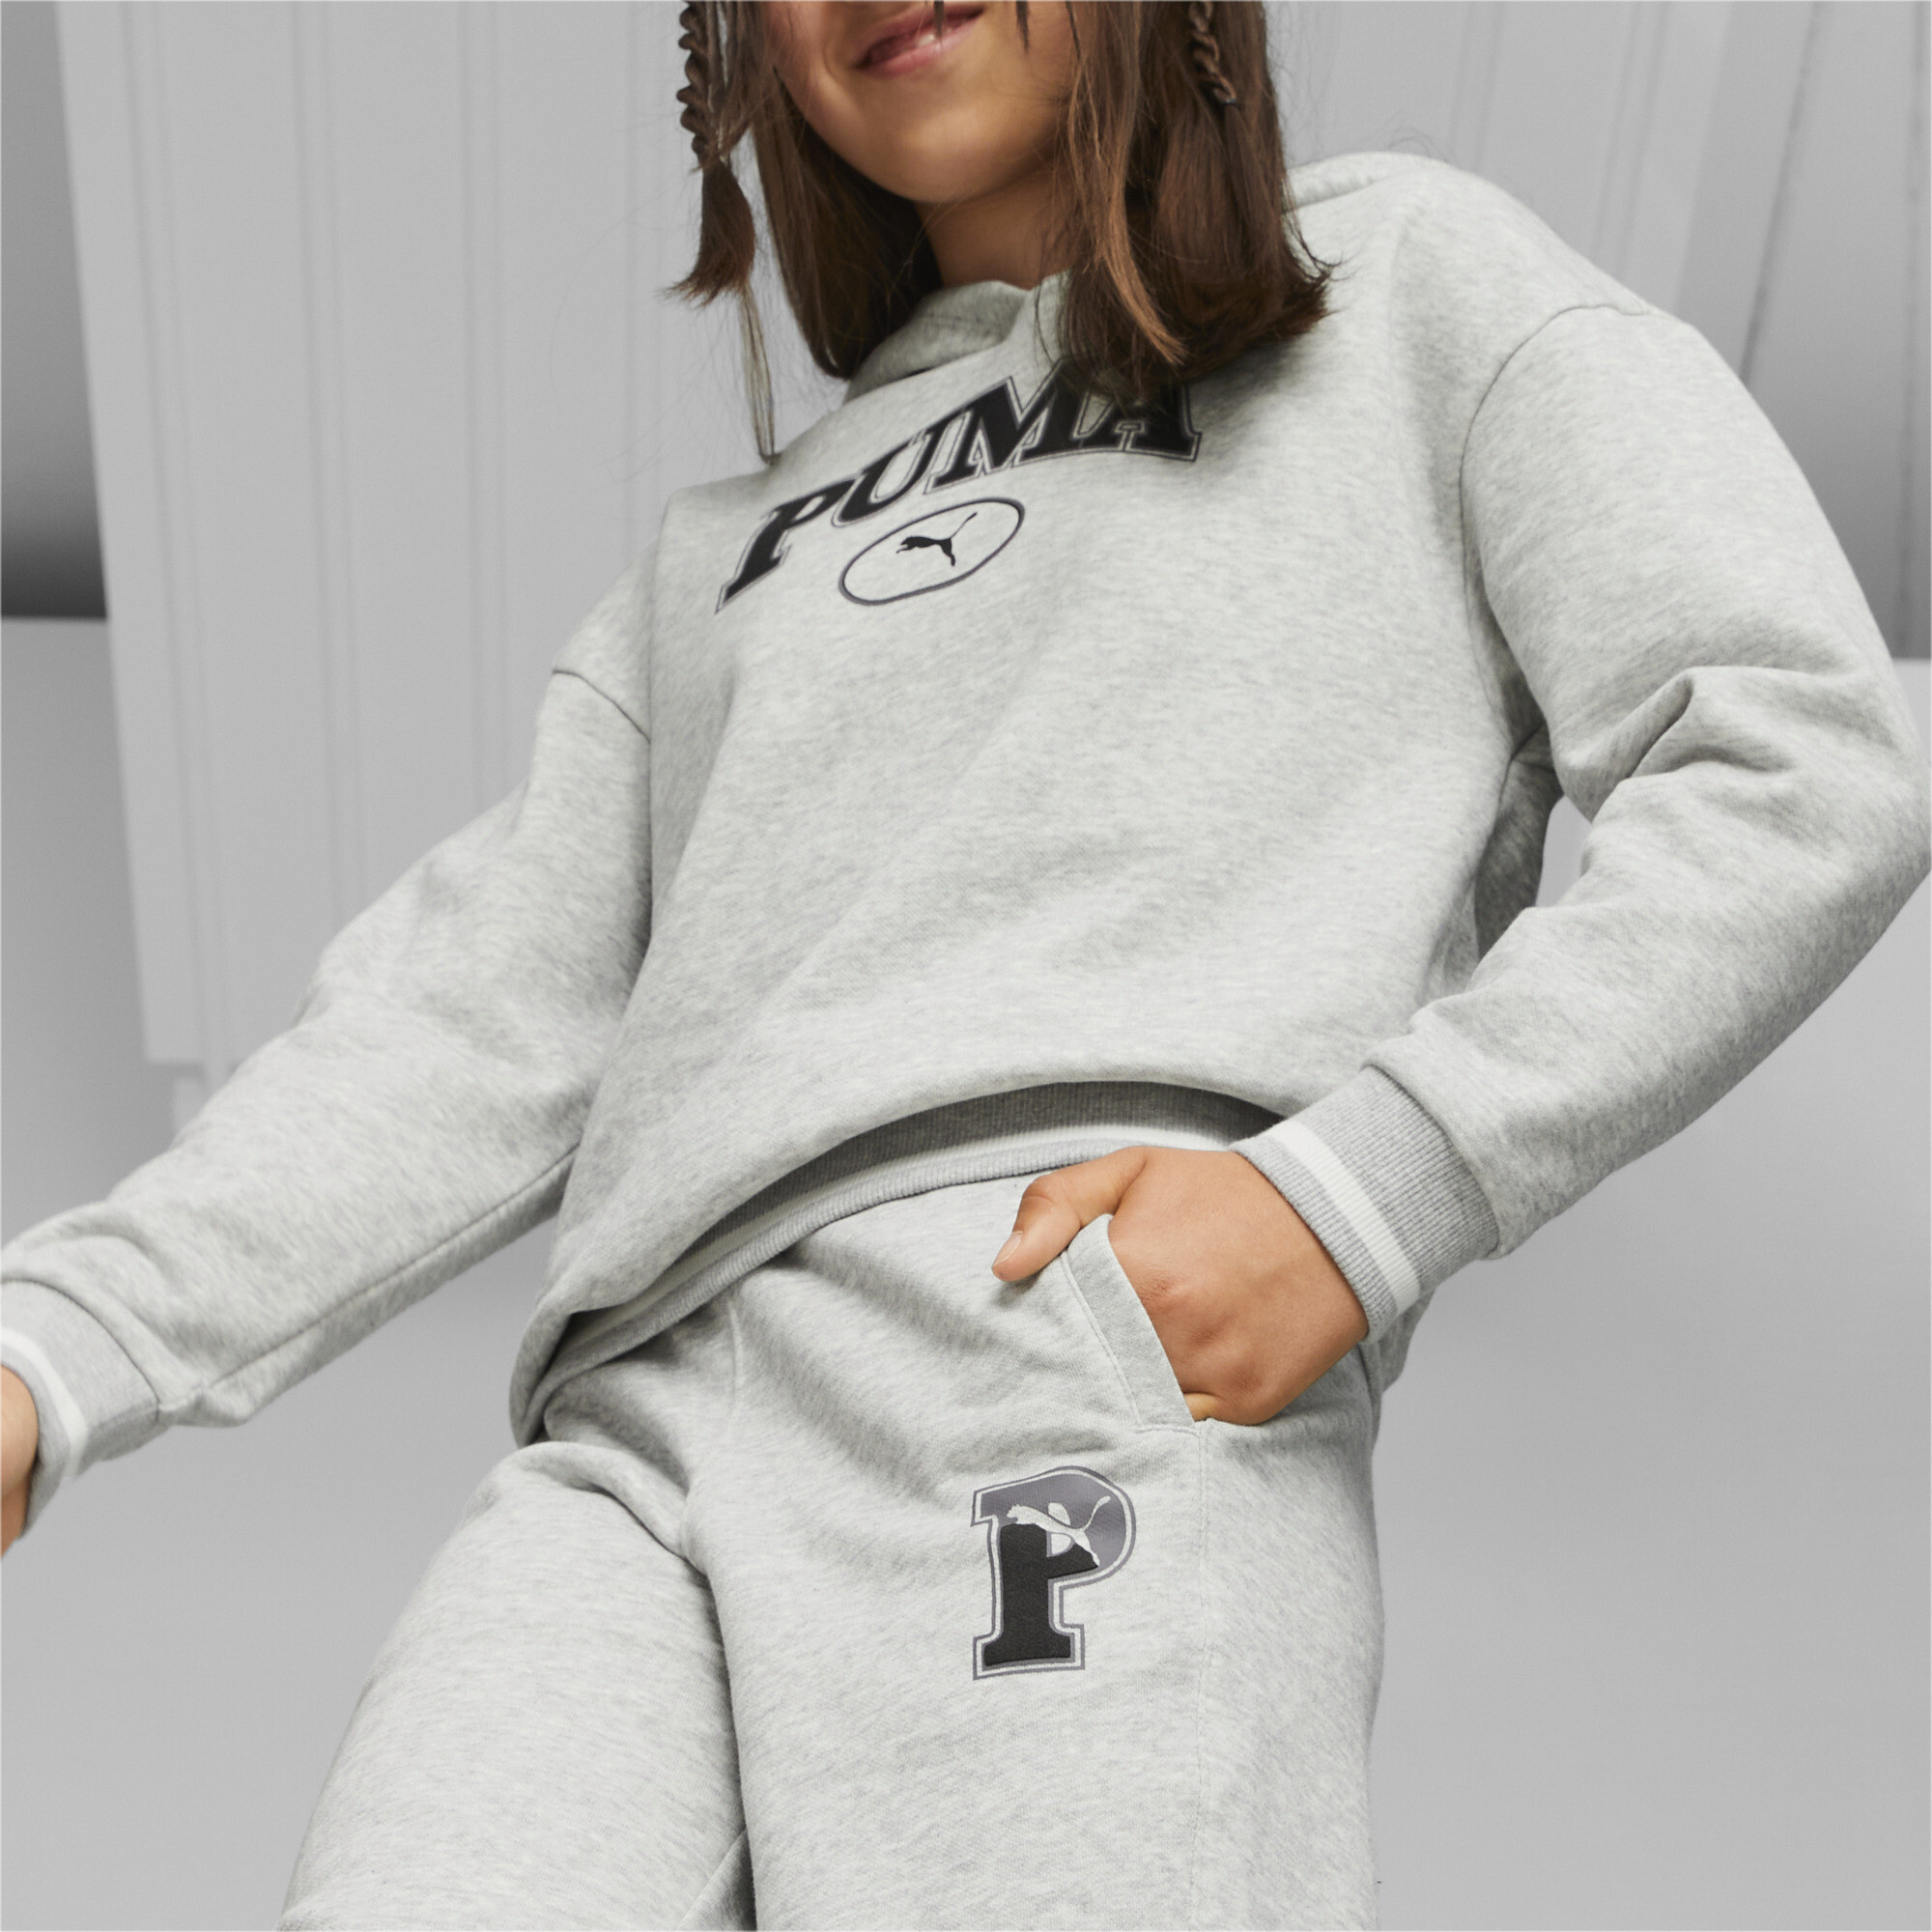 PUMA SQUAD Sweatpants In Heather, Size 7-8 Youth